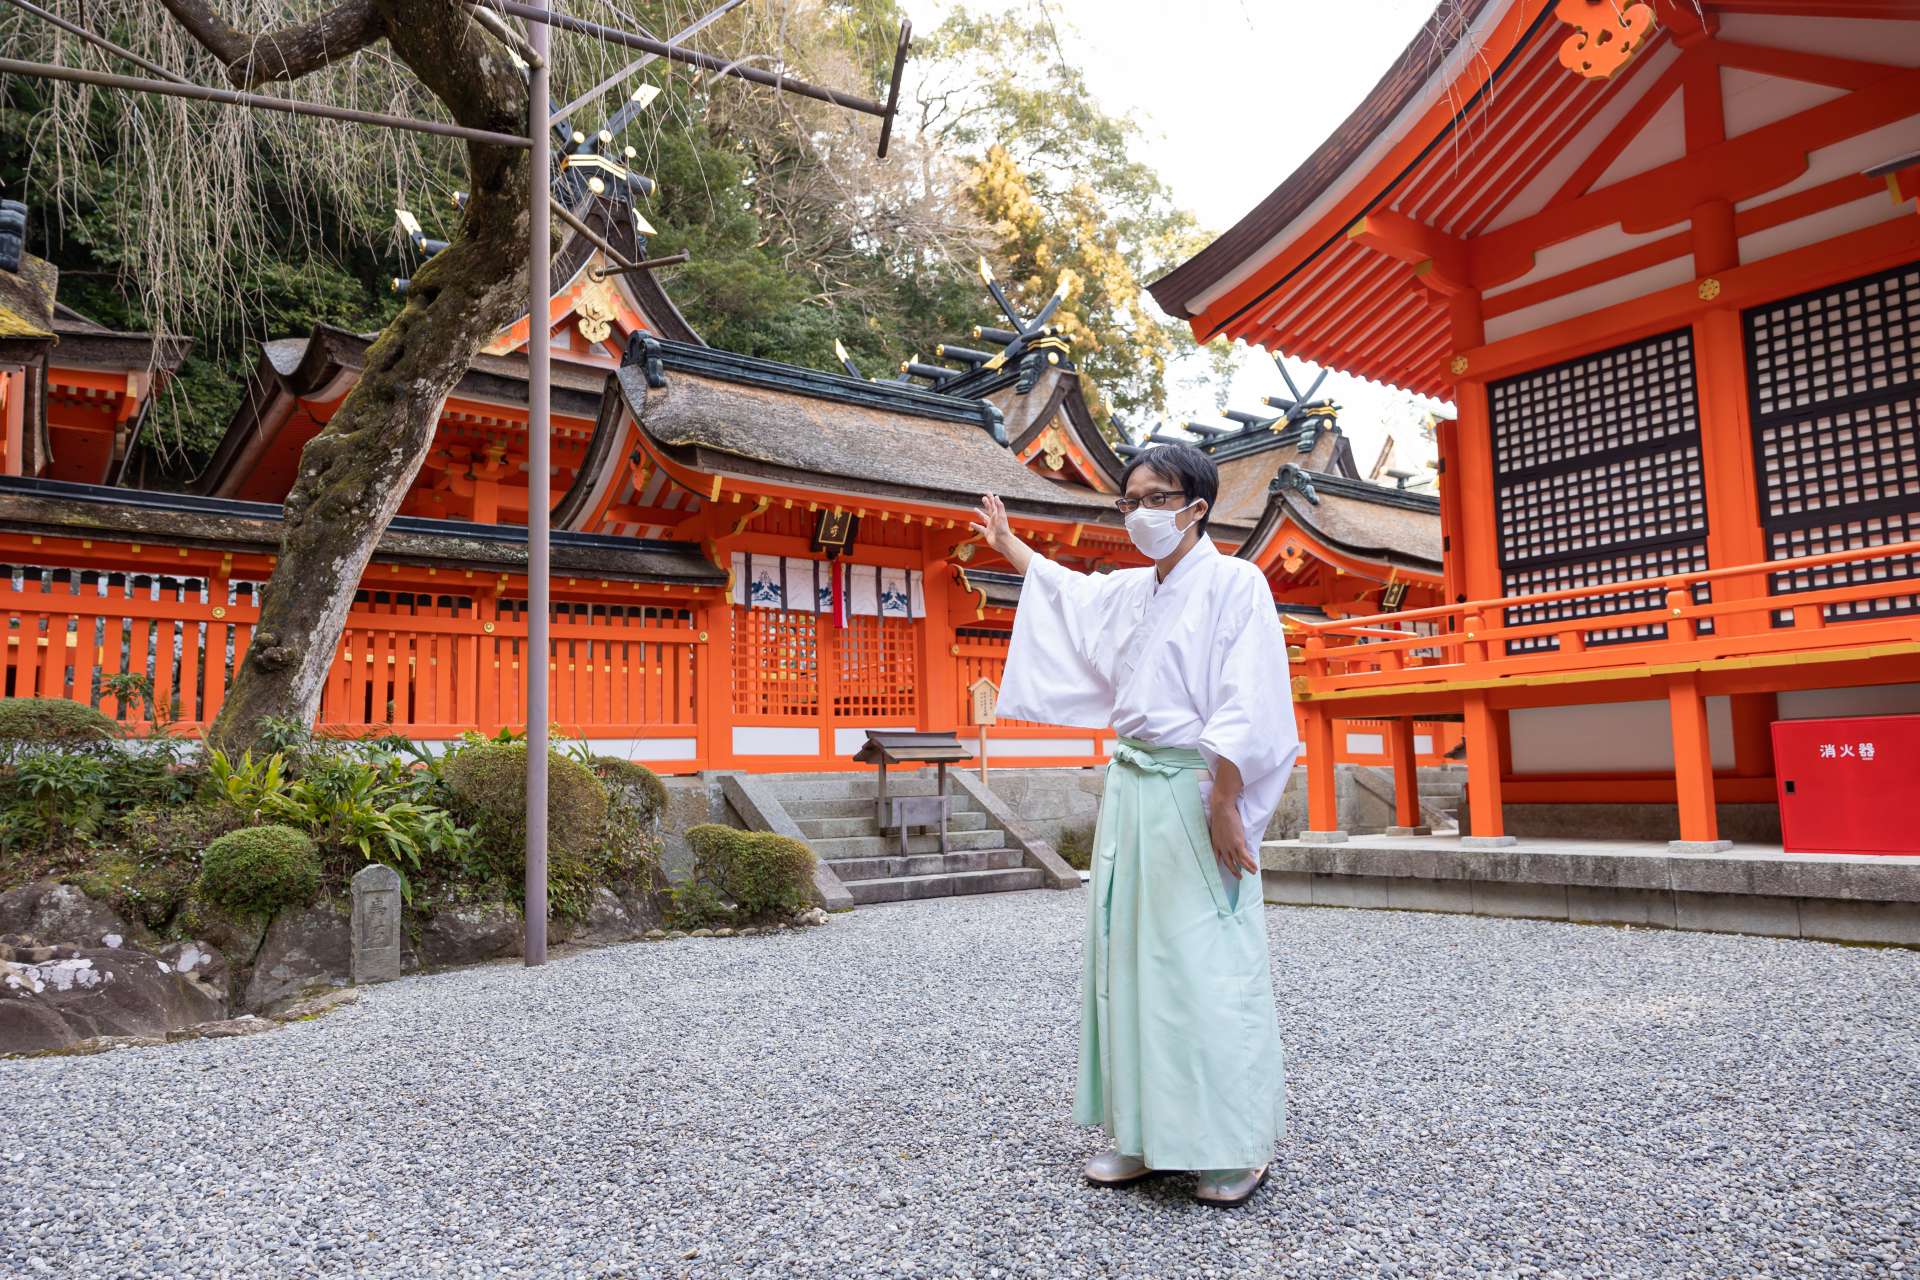 After worshipping, explore the honden (inner sanctuary) and grounds with a Shinto priest on a special guided tour.